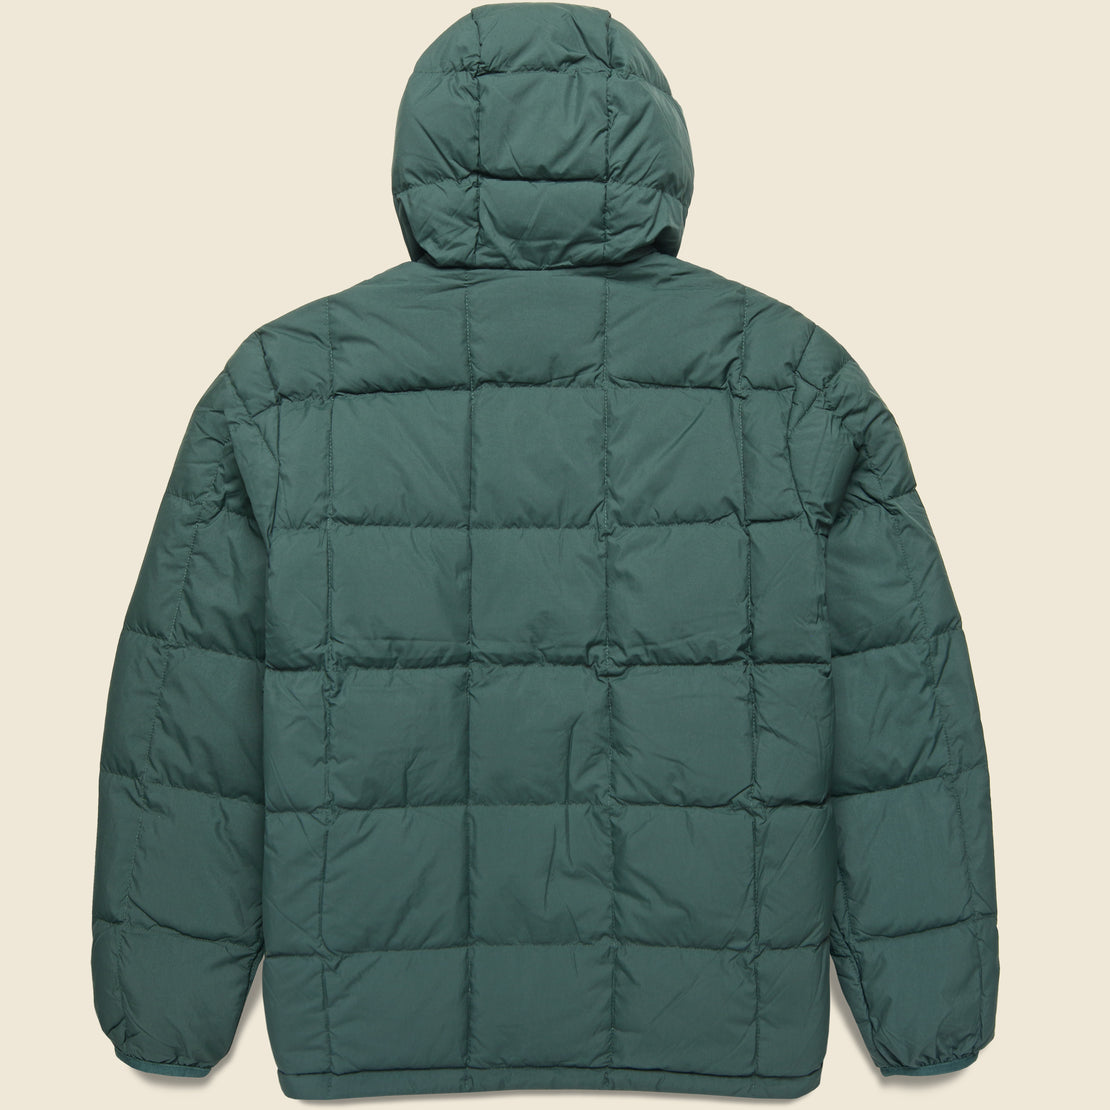 Pateros Down Jacket - Fir - Filson - STAG Provisions - Outerwear - Coat / Jacket